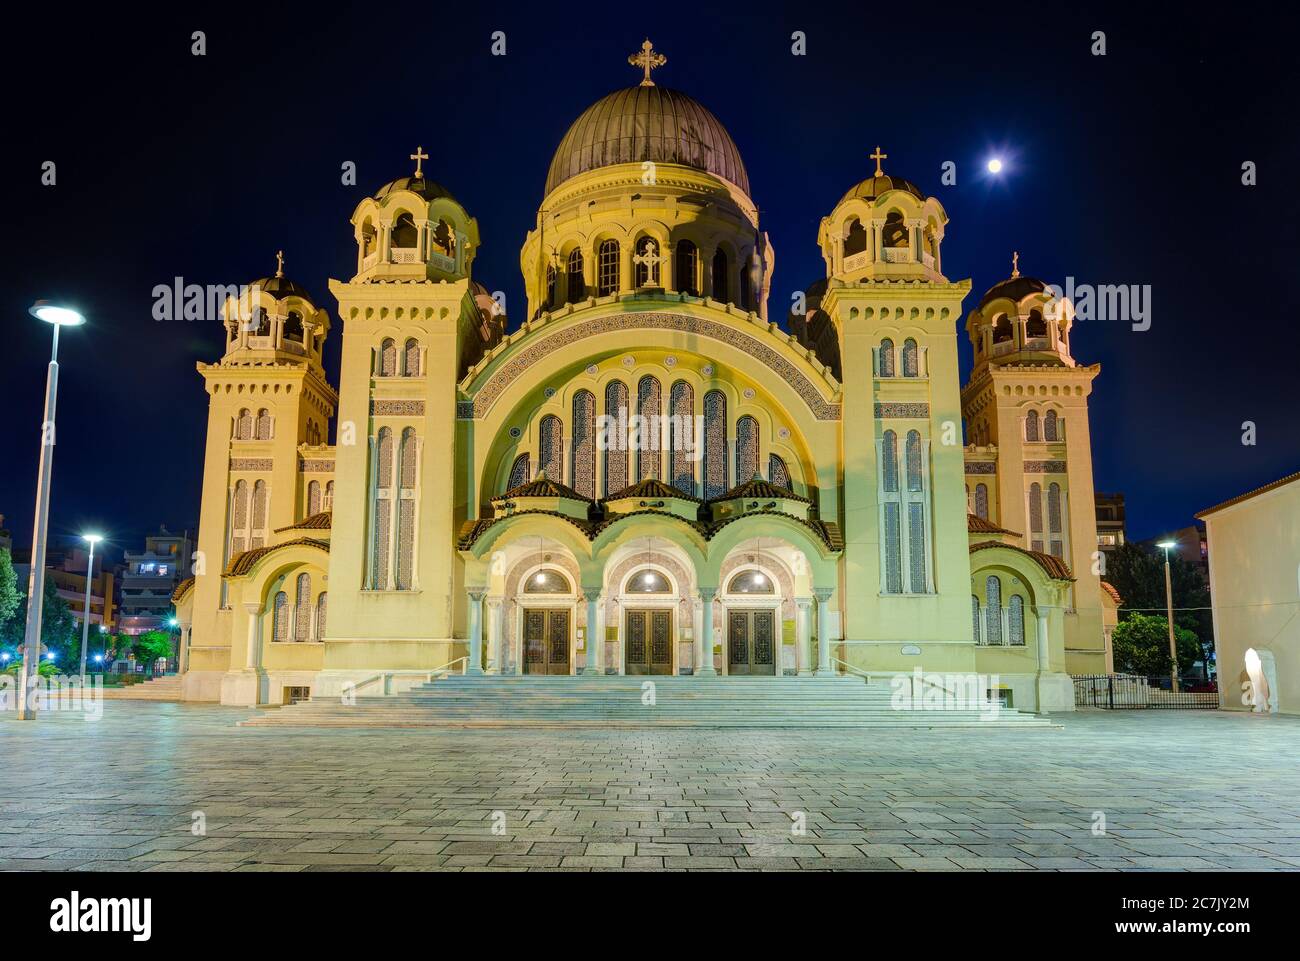 Saint Andrew basilica at night, the largest church in Greece, Patras, Peloponnese. Stock Photo